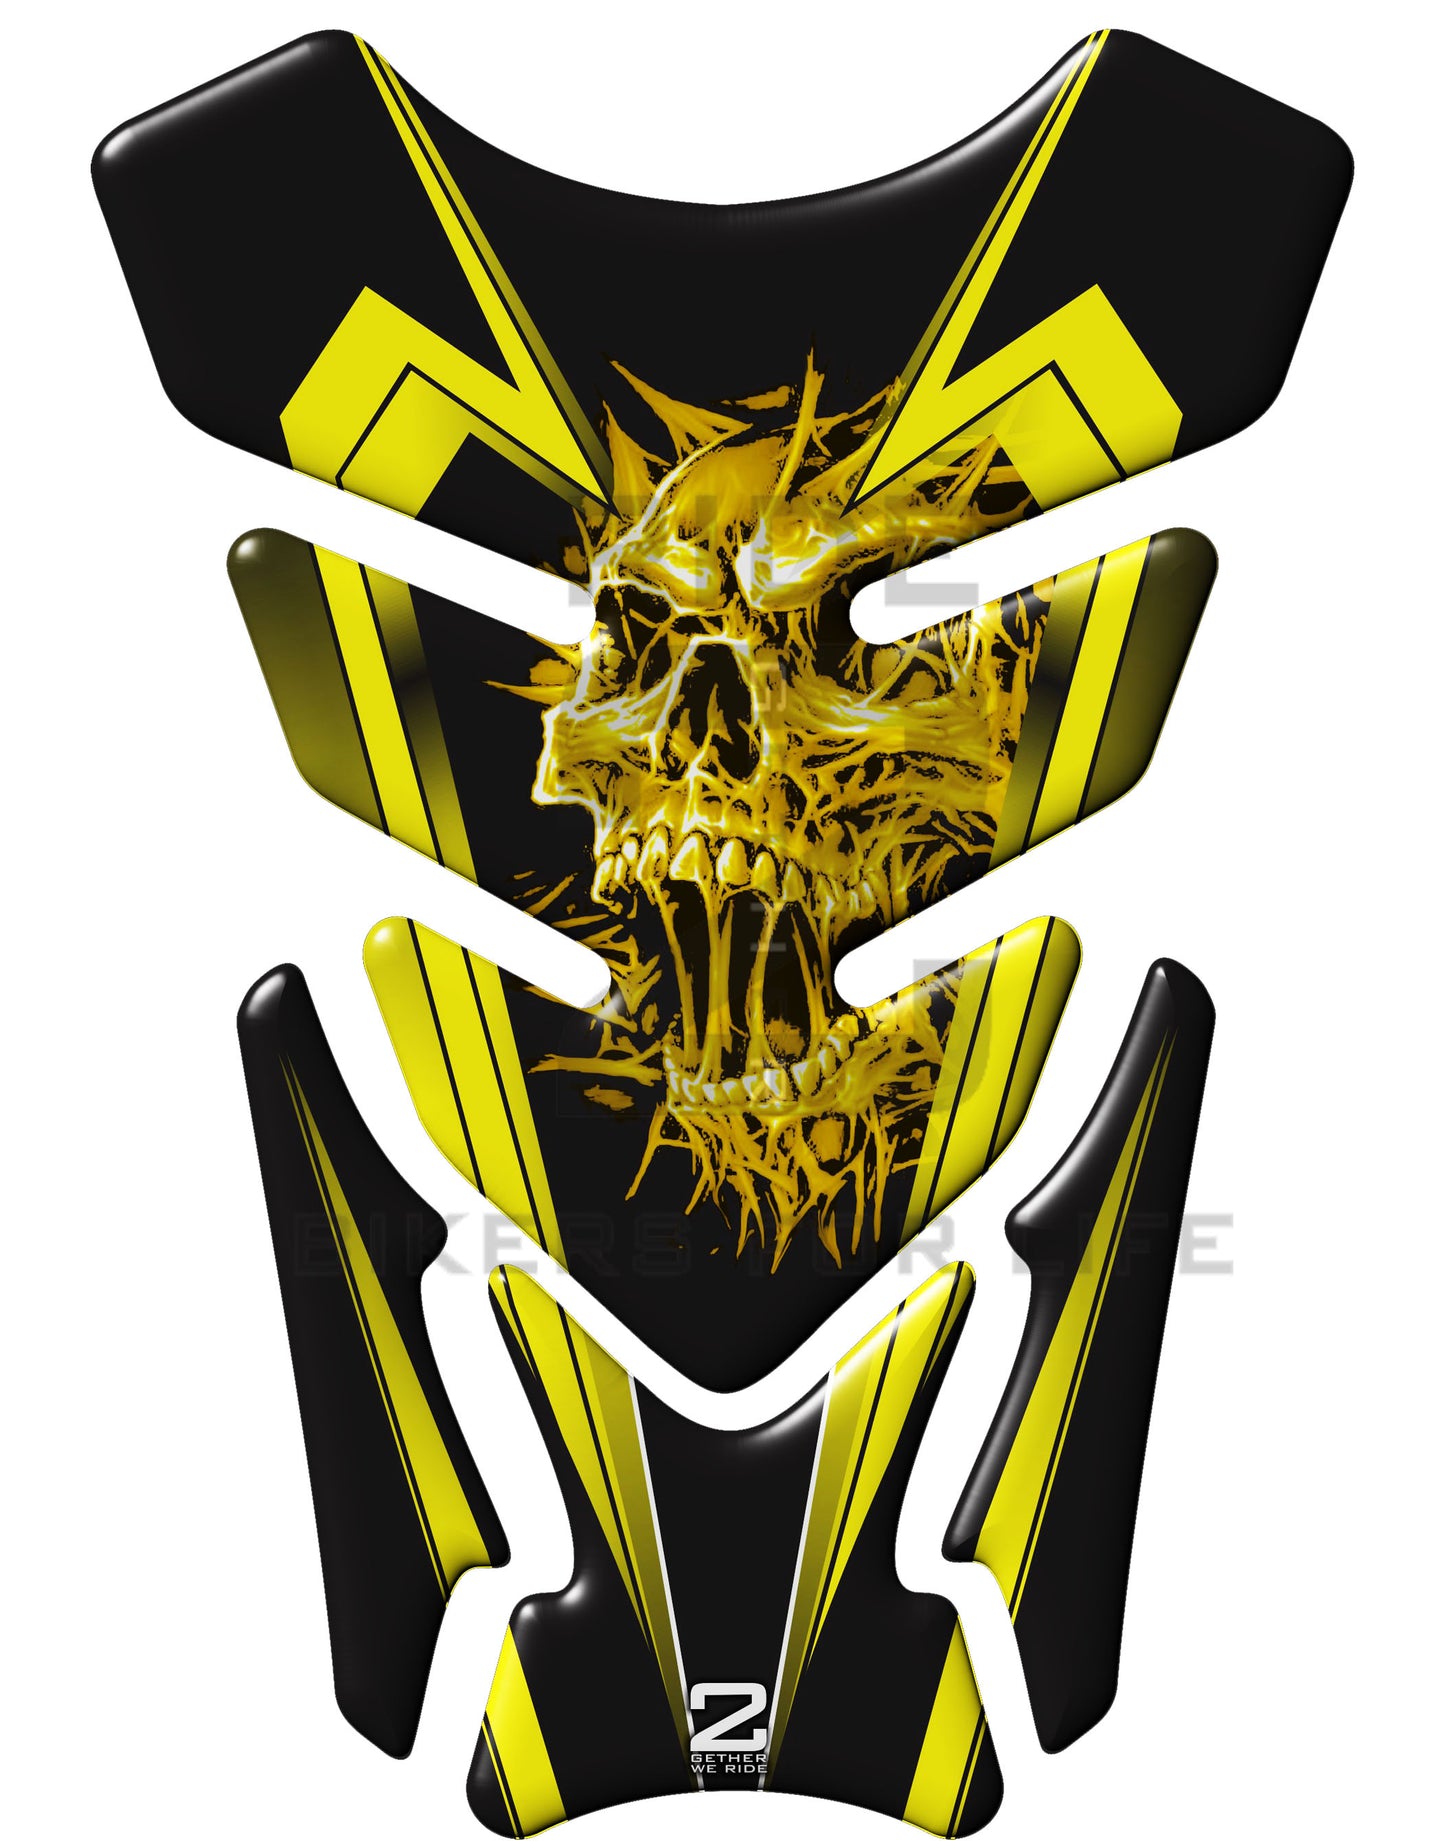 Universal Fit Yellow Screaming Skull Motor Bike Tank Pad Protector. A Street Pad which fits most motorcycles.